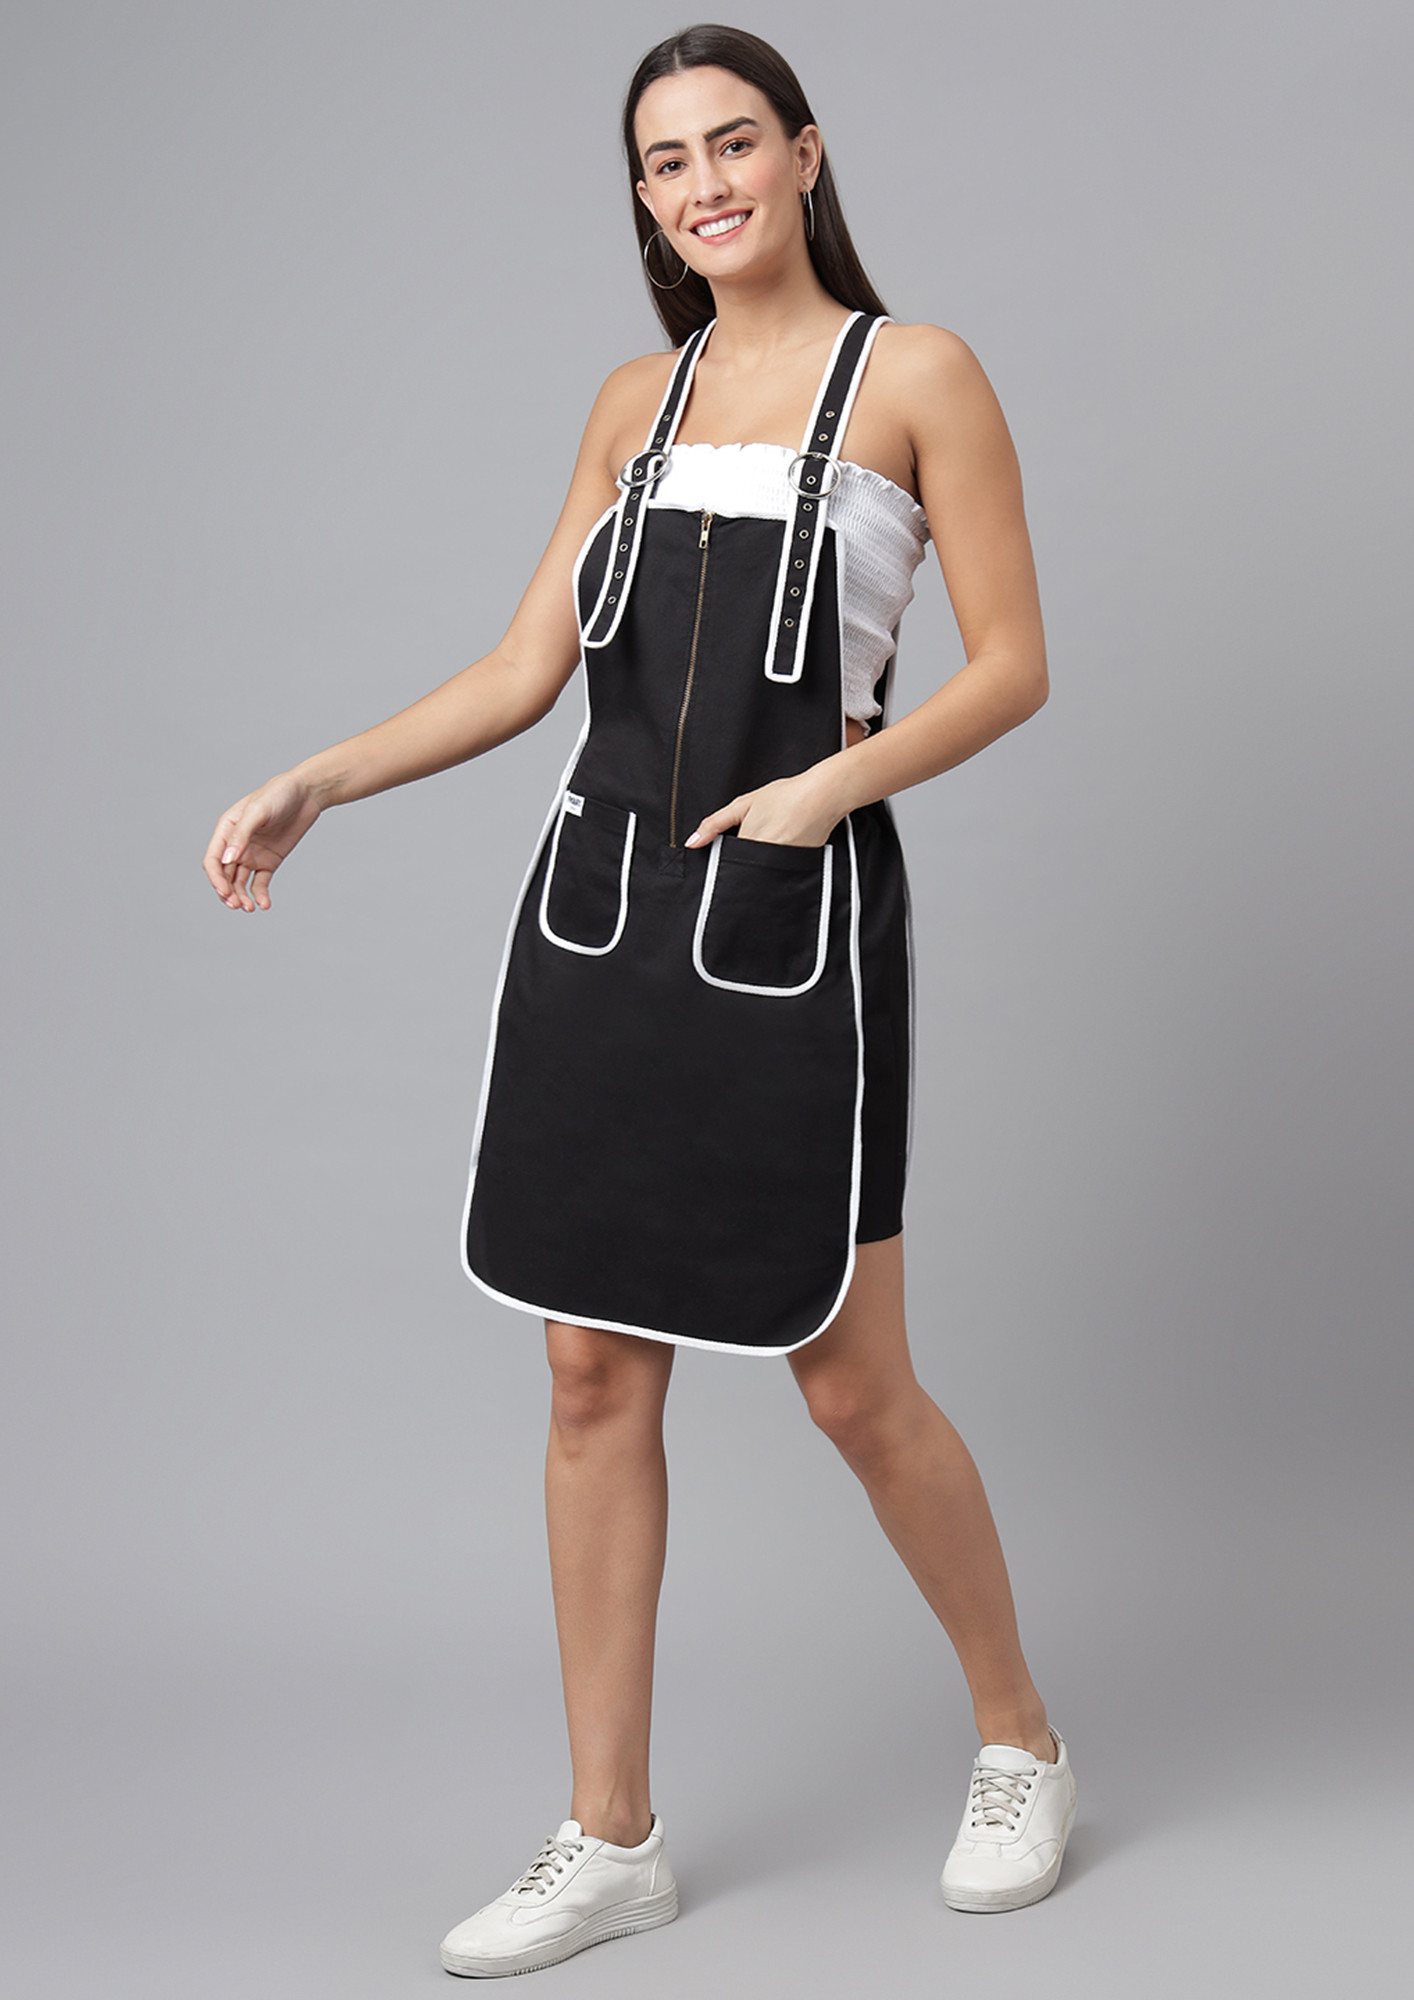 Buy FINSBURY LONDON Women's Dungaree Dress with Contrast Piping - Ebony  Black for Women Online in India